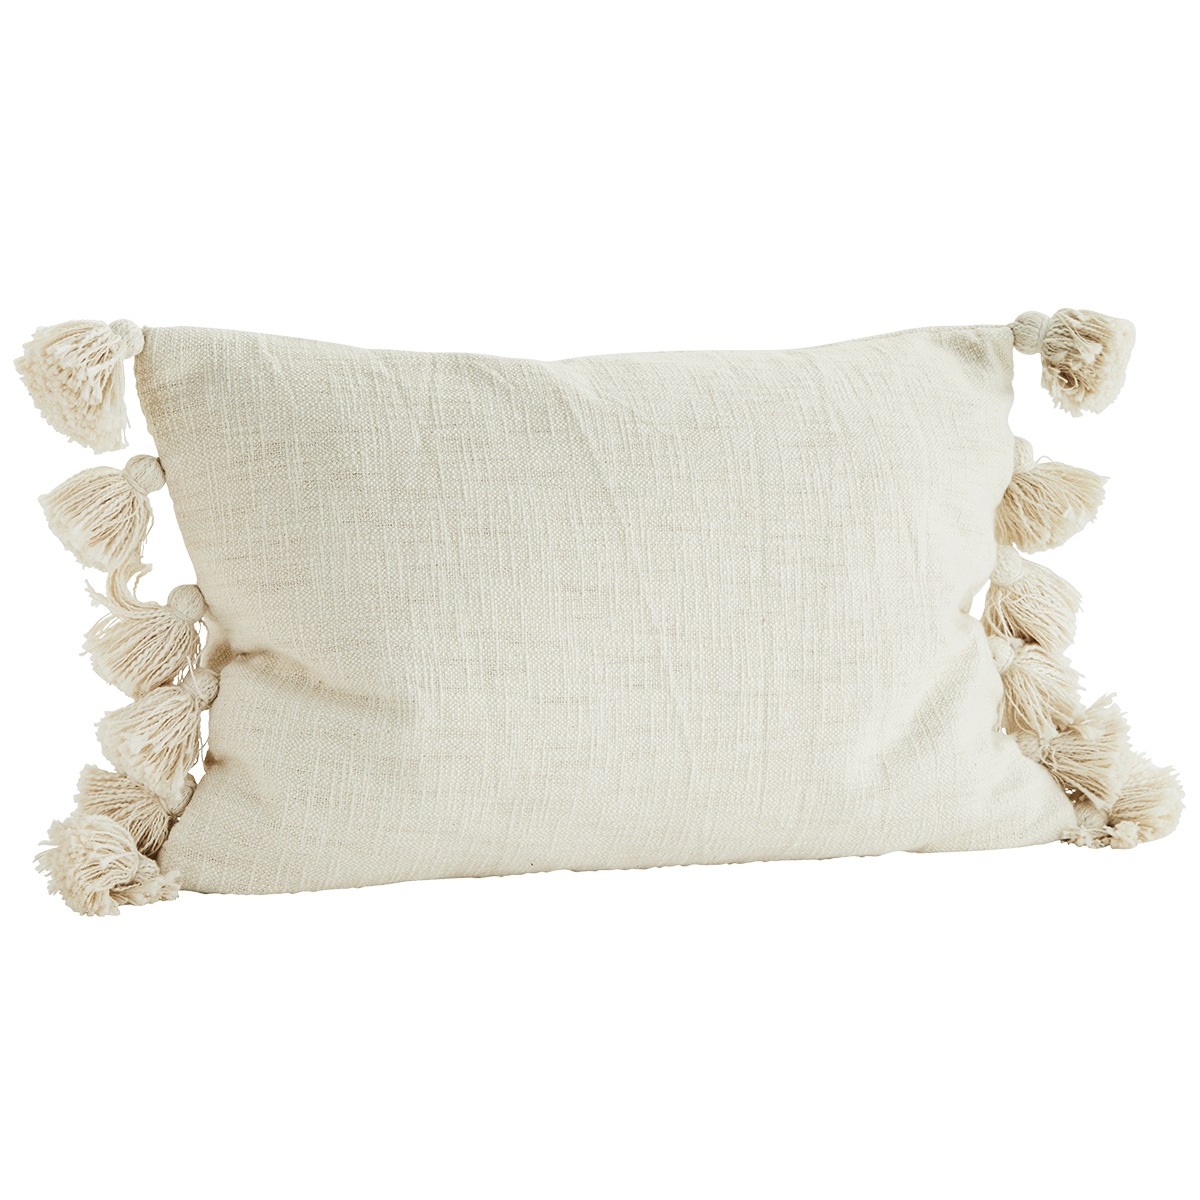 Cushion Cover With Tassels 40x60 cm, Off-White